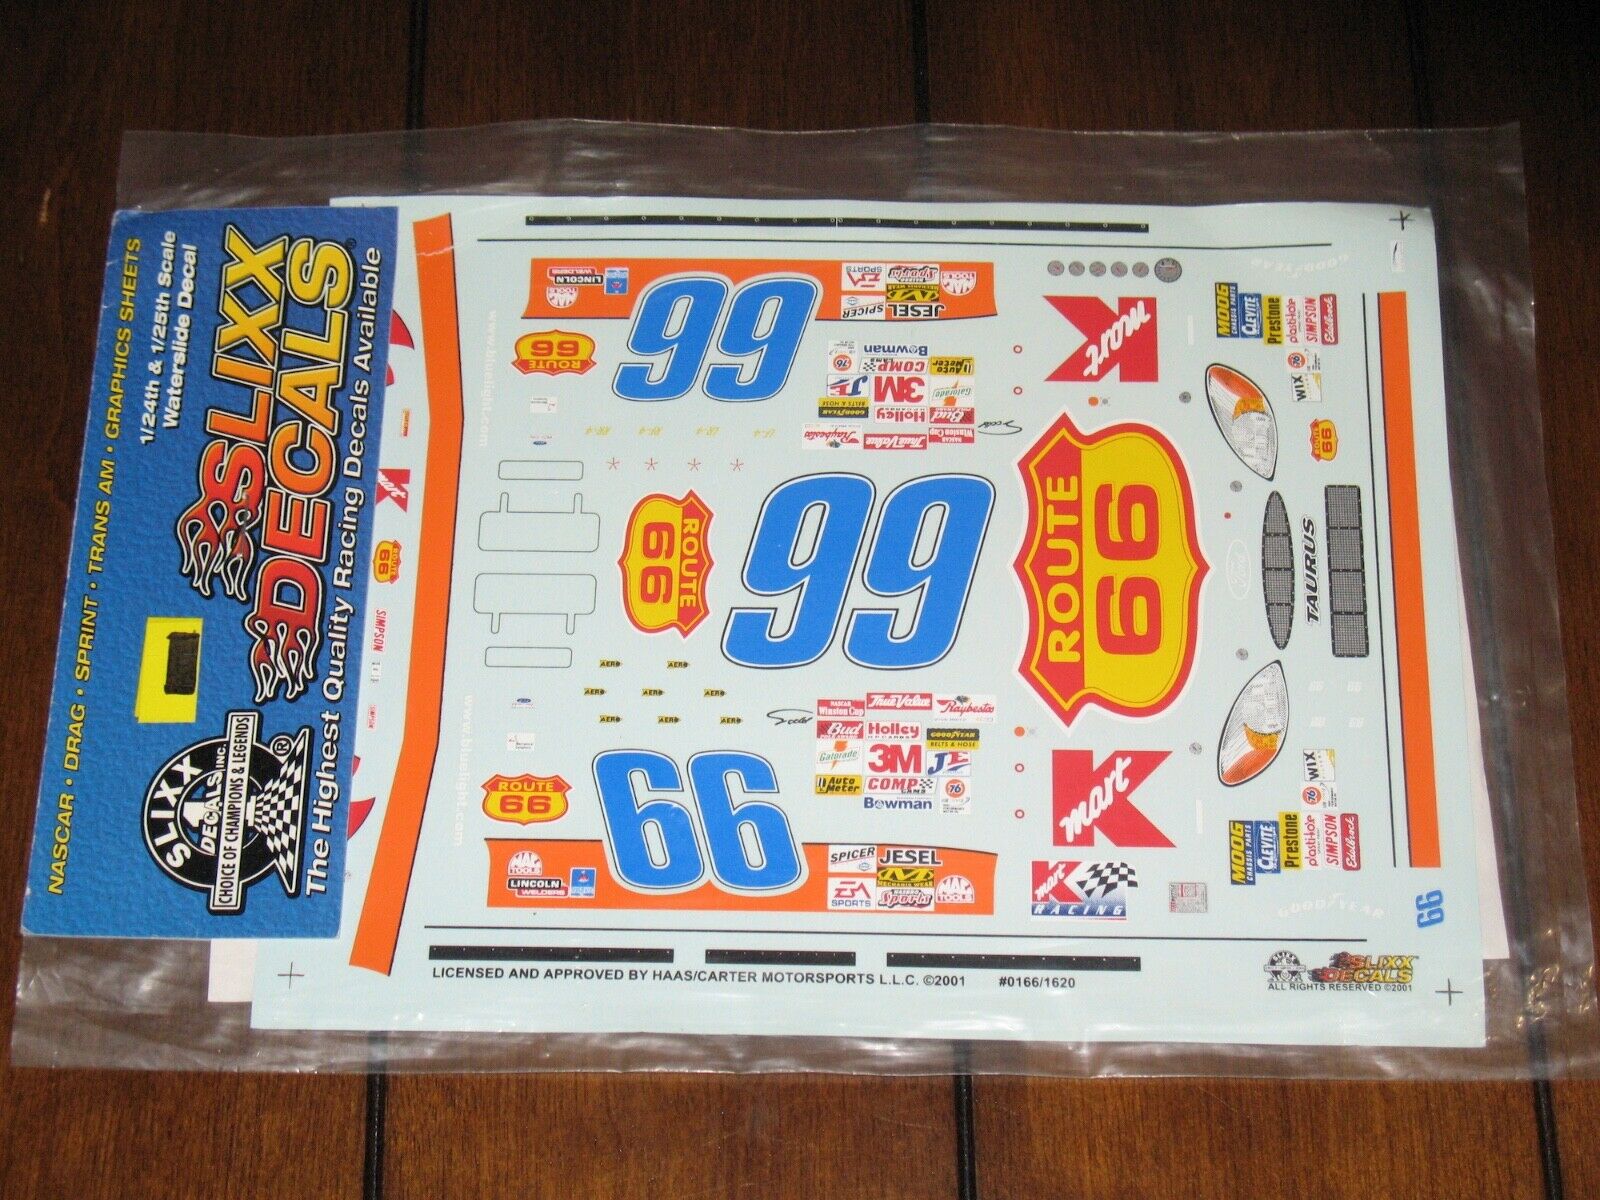 Slixx Nascar 1620 66 Route Big Kmart Todd Bodine Waterslide Decals 1/24 Ford